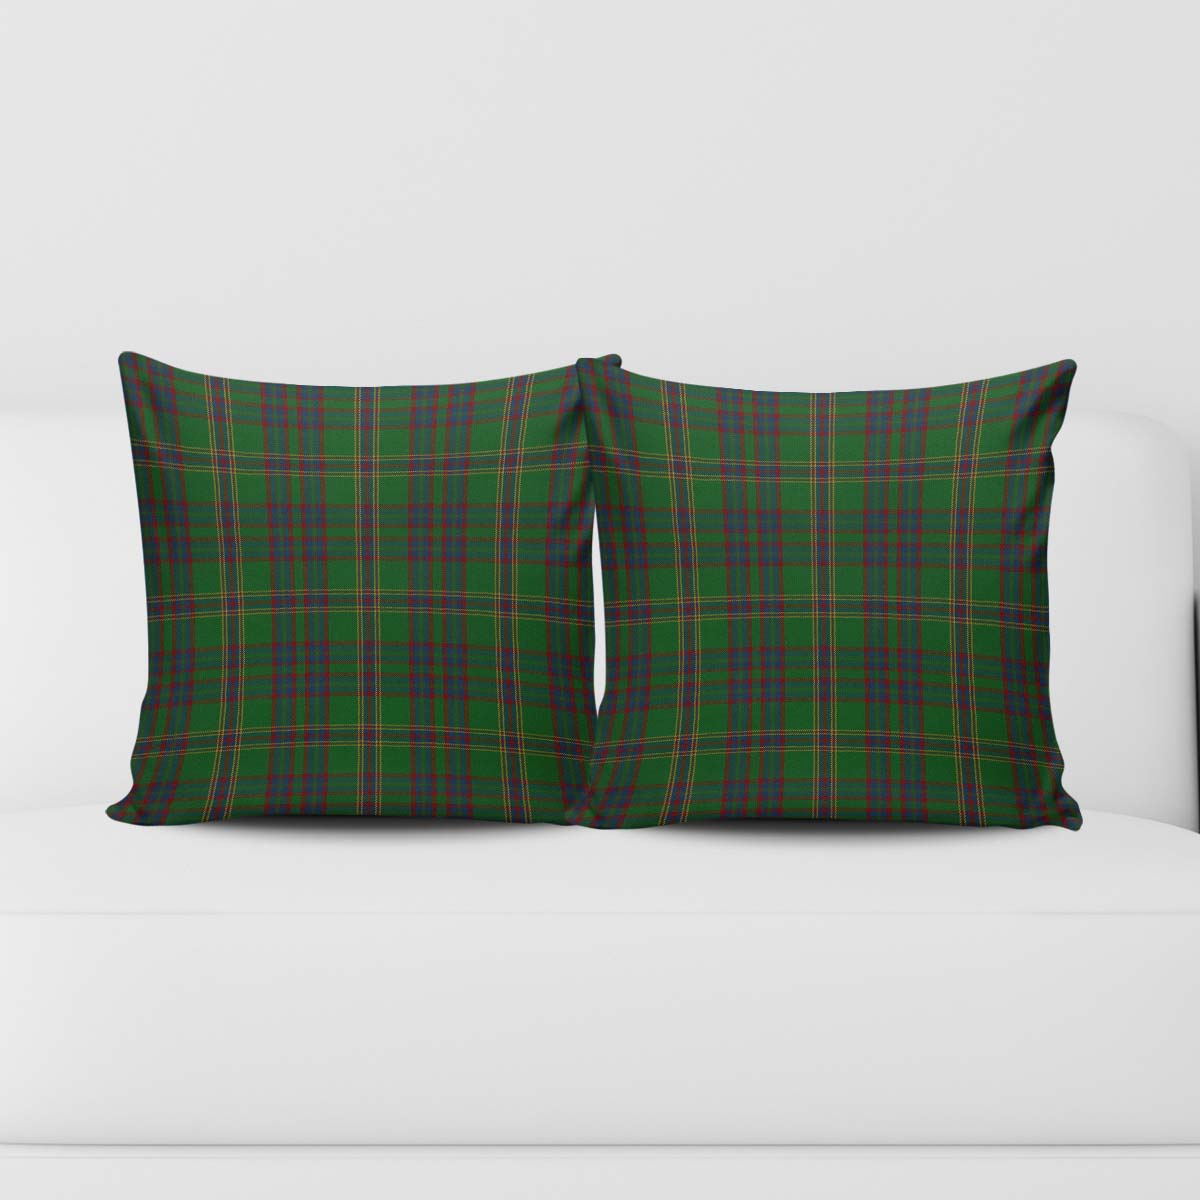 Westmeath County Ireland Tartan Pillow Cover Square Pillow Cover - Tartanvibesclothing